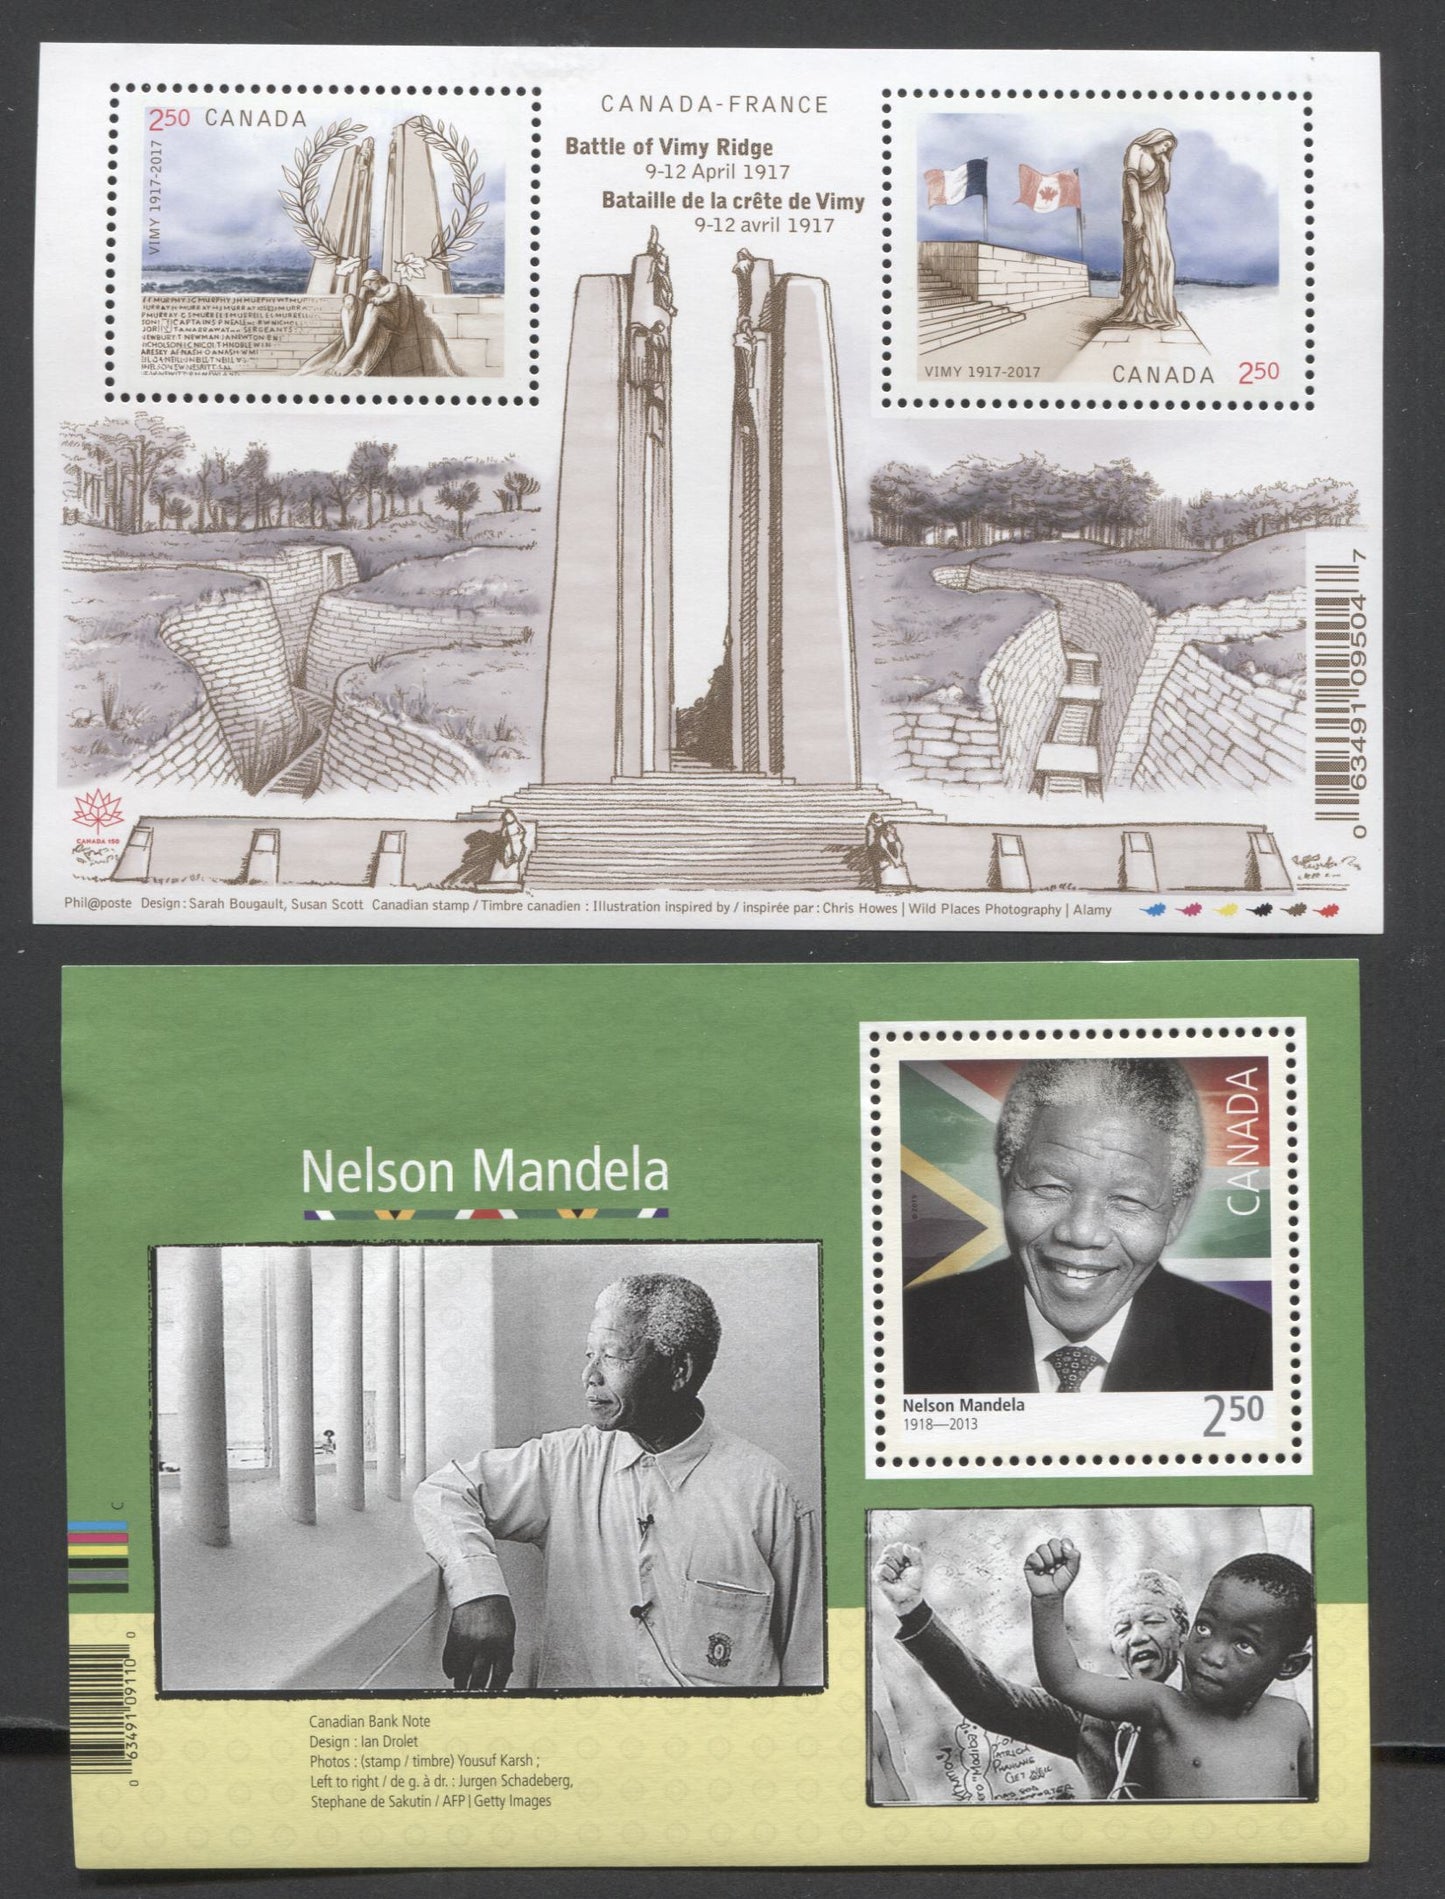 Lot 35 Canada #2805, 2981 $2.50 Multicolored Nelson Mandela & Vimy Ridge, 2015 & 2017 Nelson Mandela & Vimy Ridge Issues, 2 VFNH Souvenir Sheets On Low Fluorescent Paper